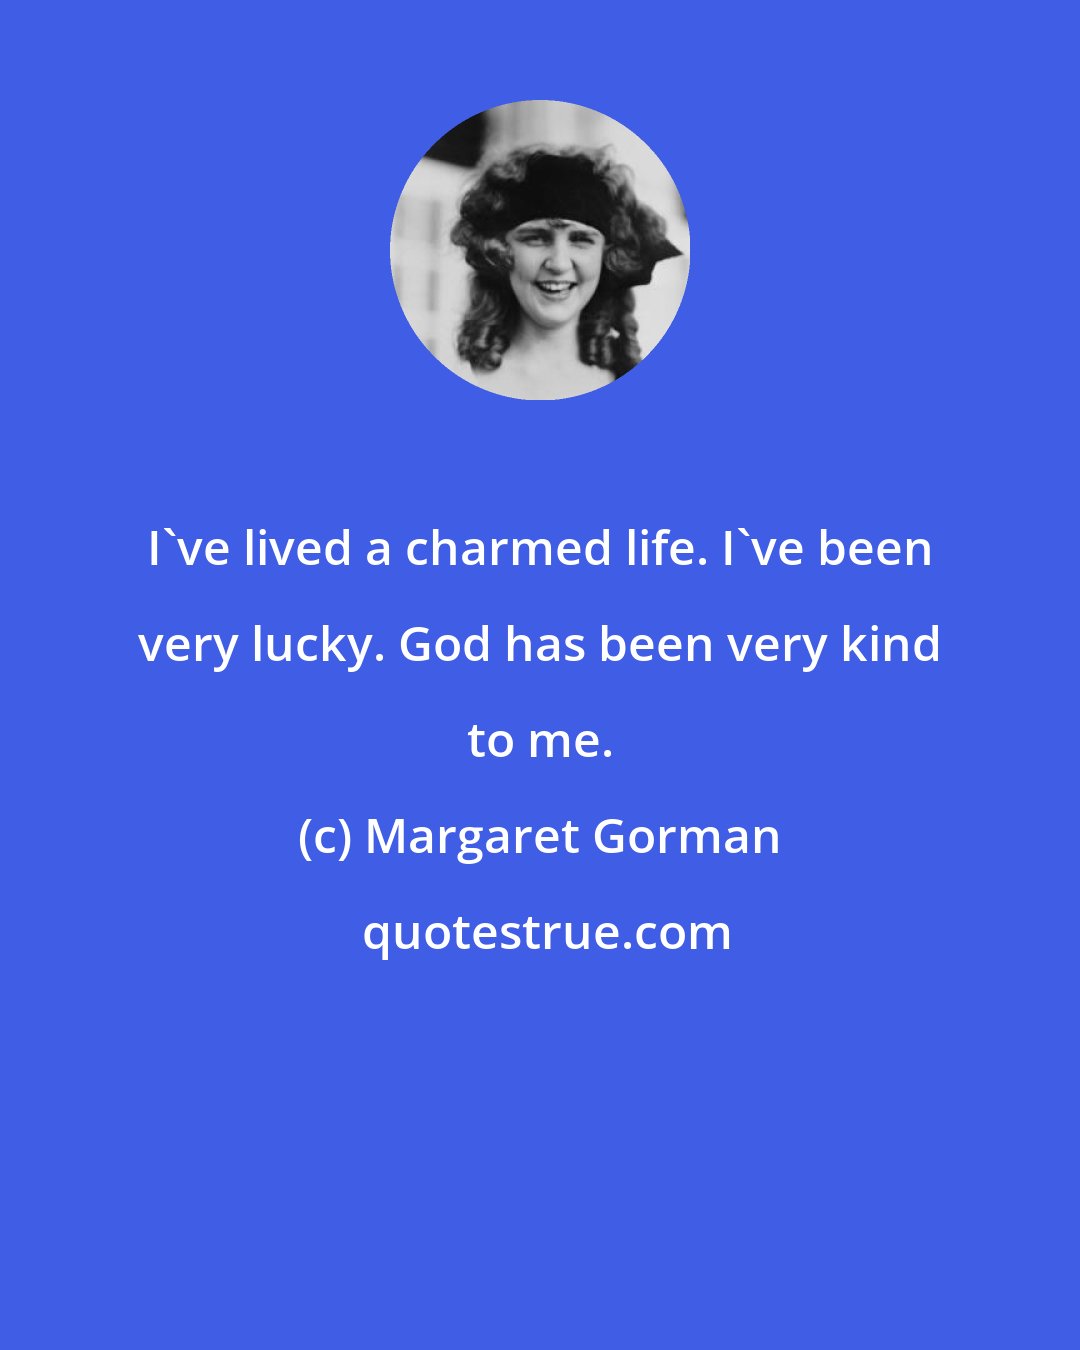 Margaret Gorman: I've lived a charmed life. I've been very lucky. God has been very kind to me.